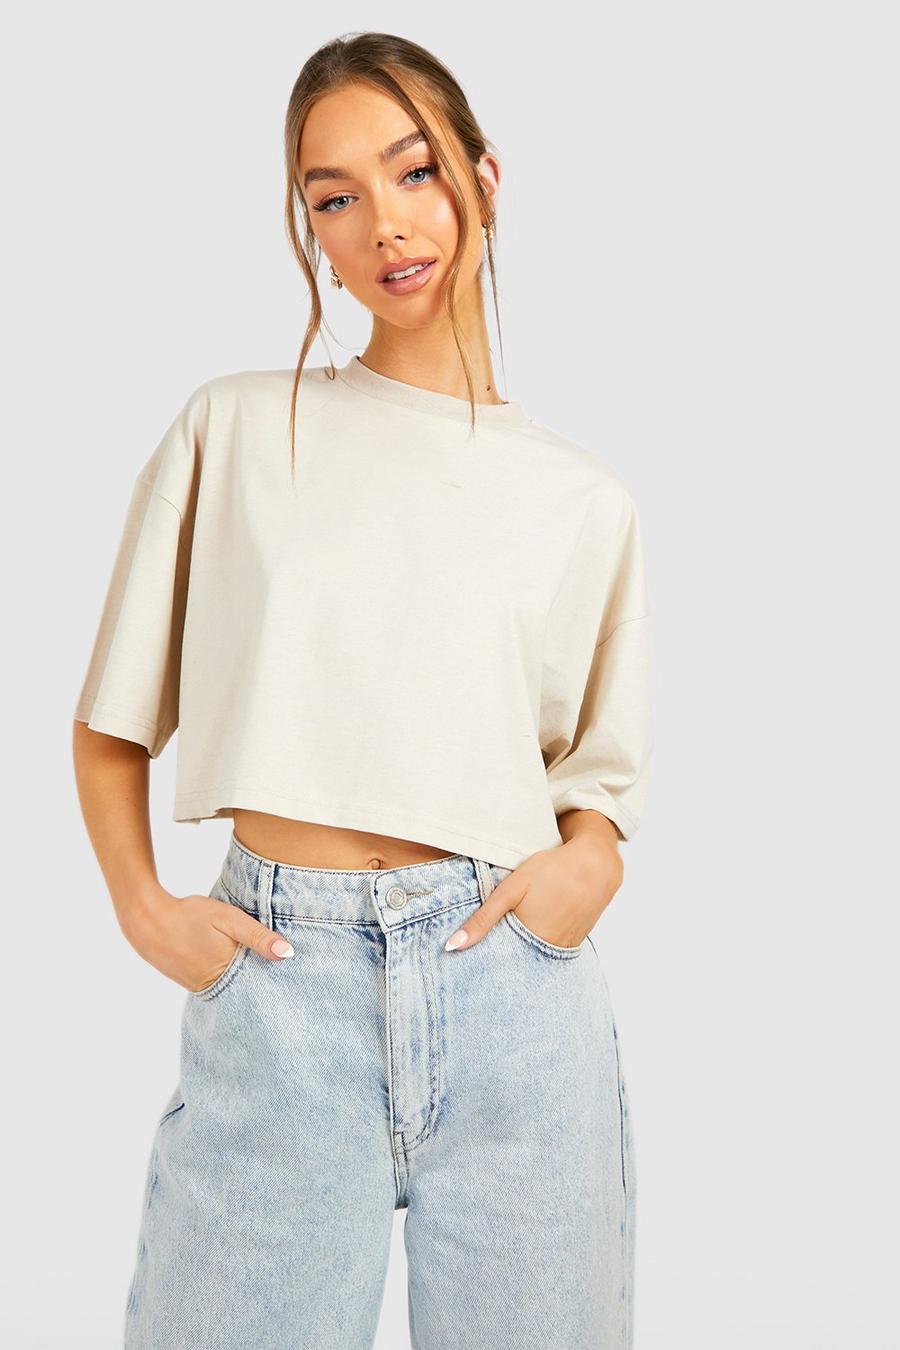 Stone beis Boxy Fit Crop Tshirt